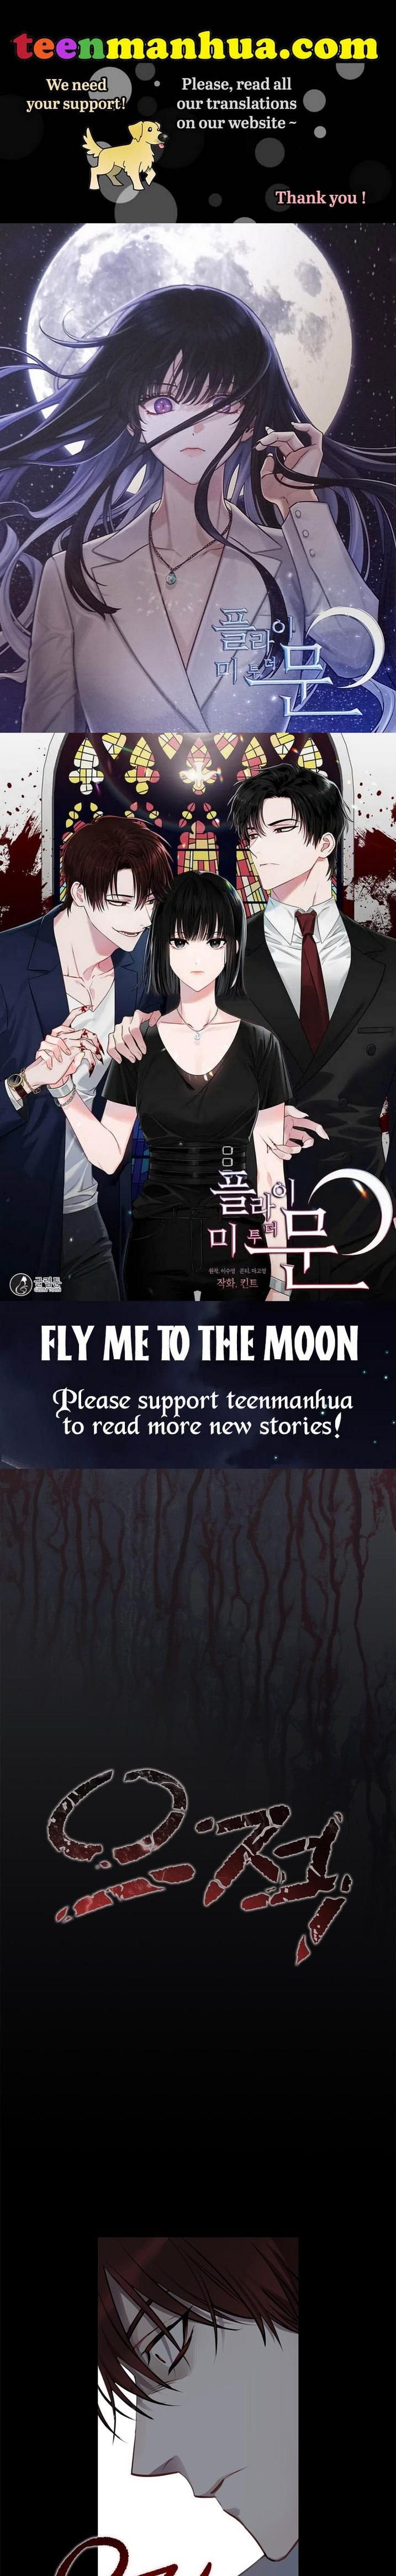 Fly Me To The Moon Ch 48 Read Fly Me To The Moon Chapter 1 on Mangakakalot